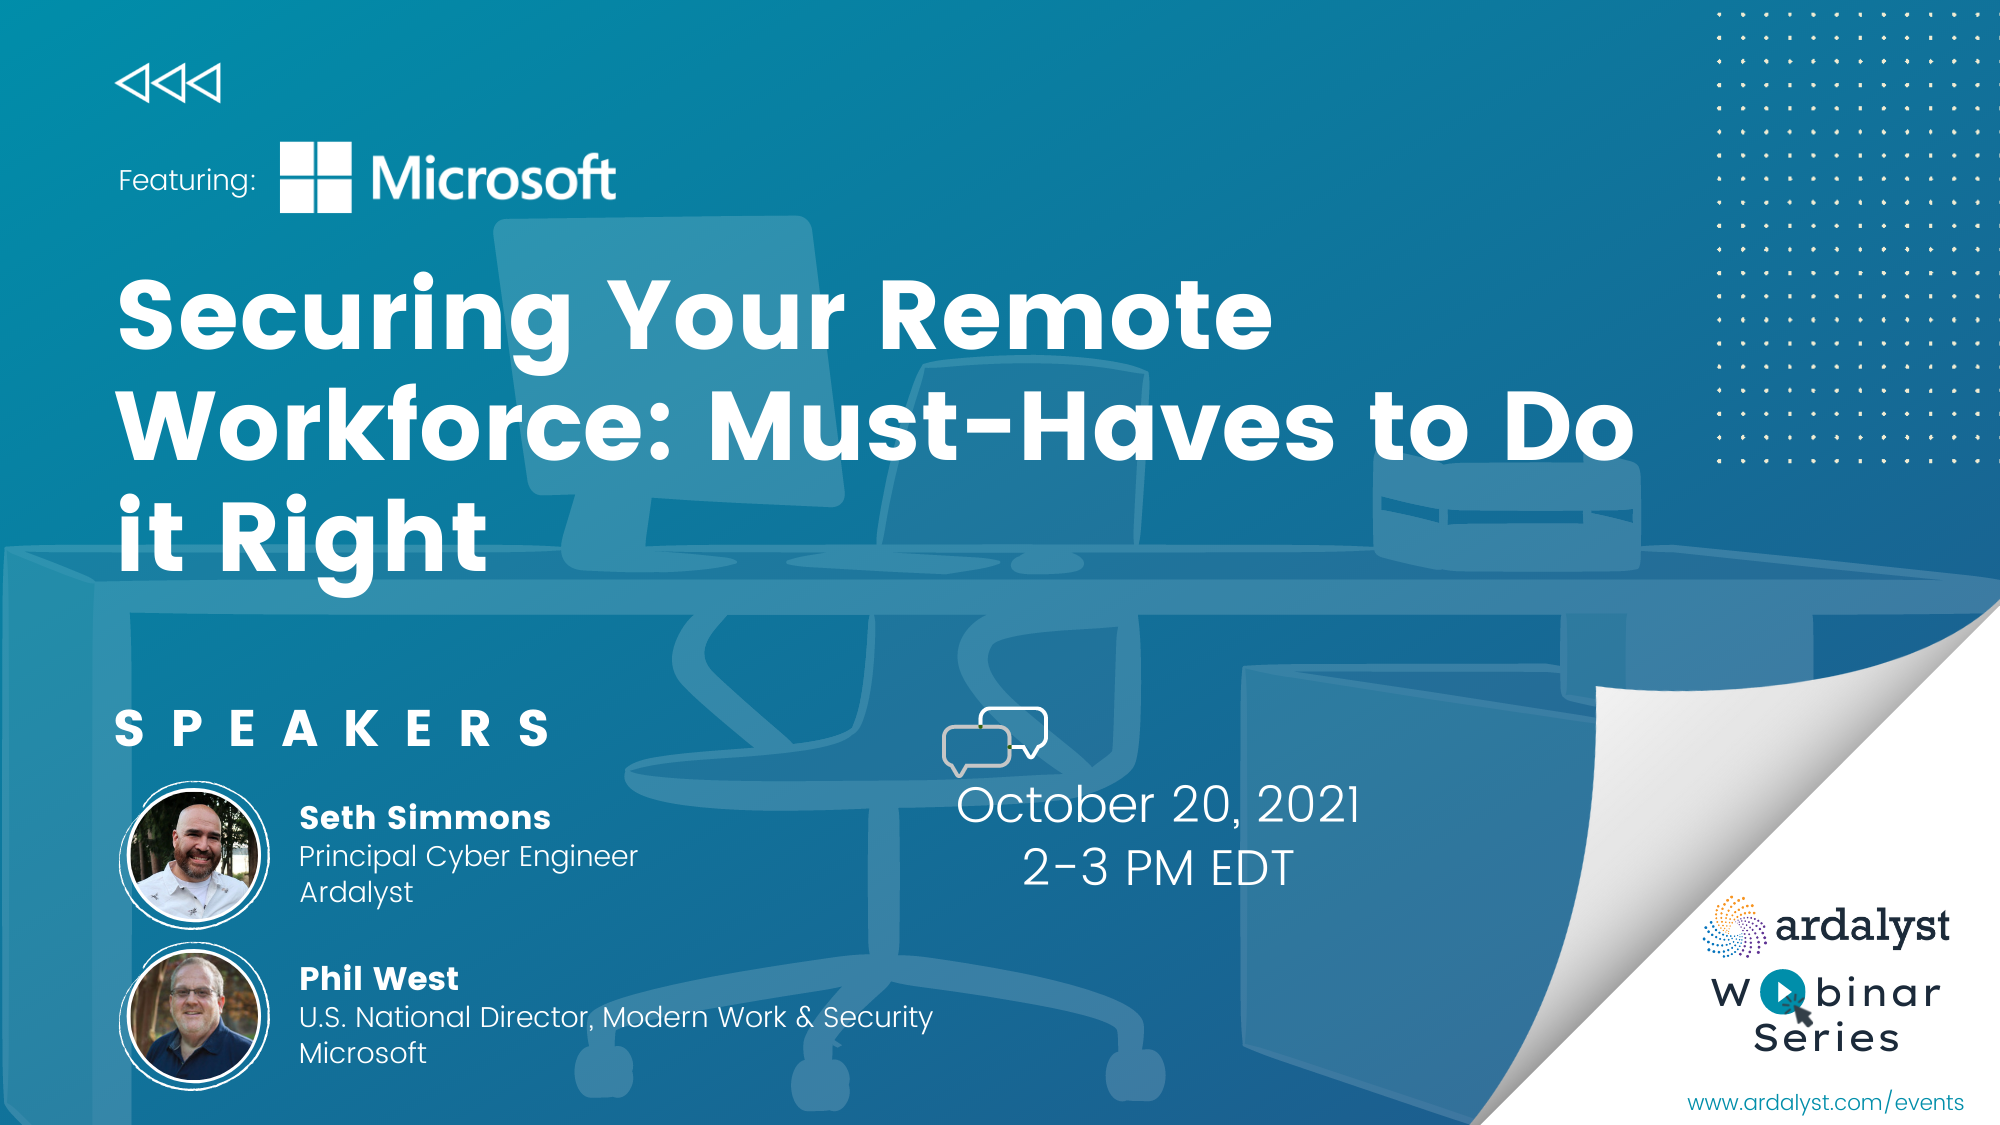 Securing Your Remote Workforce - Part 2